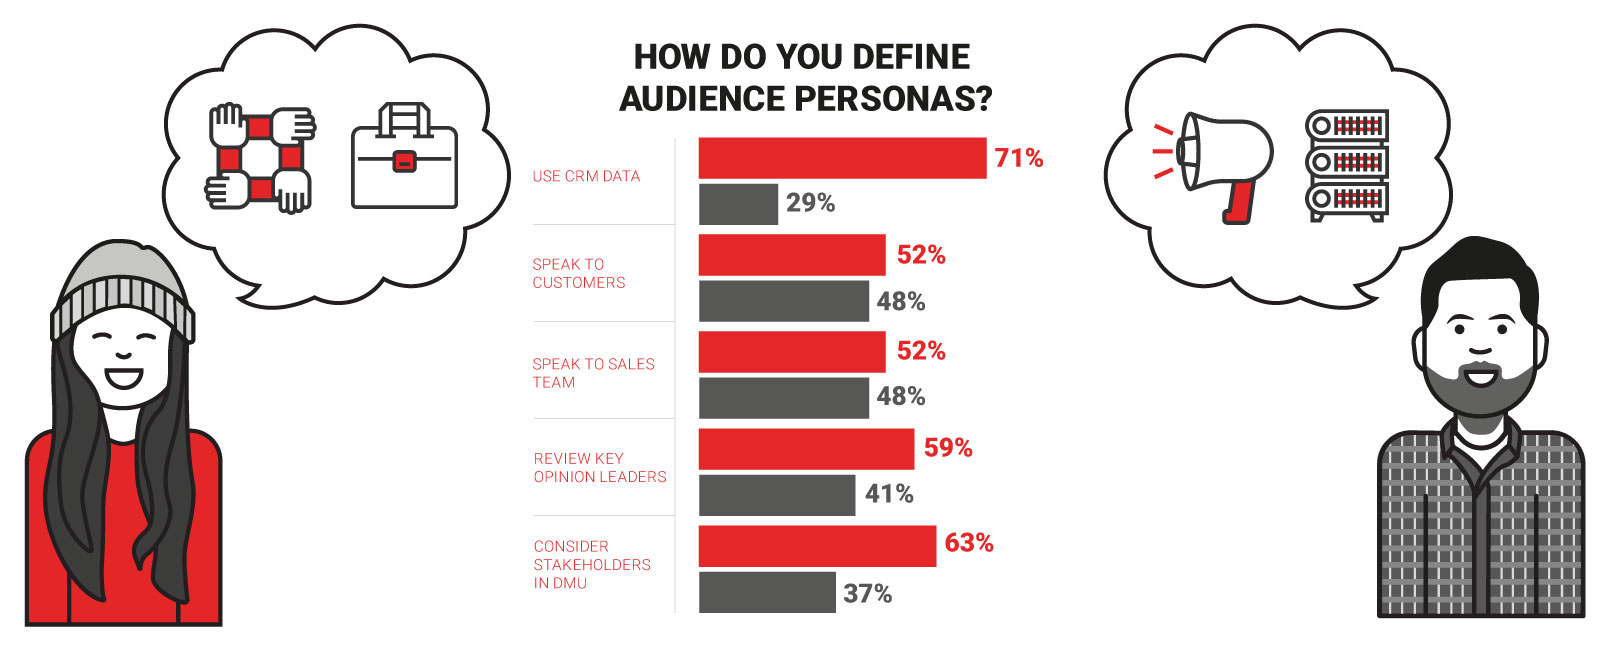 How do you define audience personas?